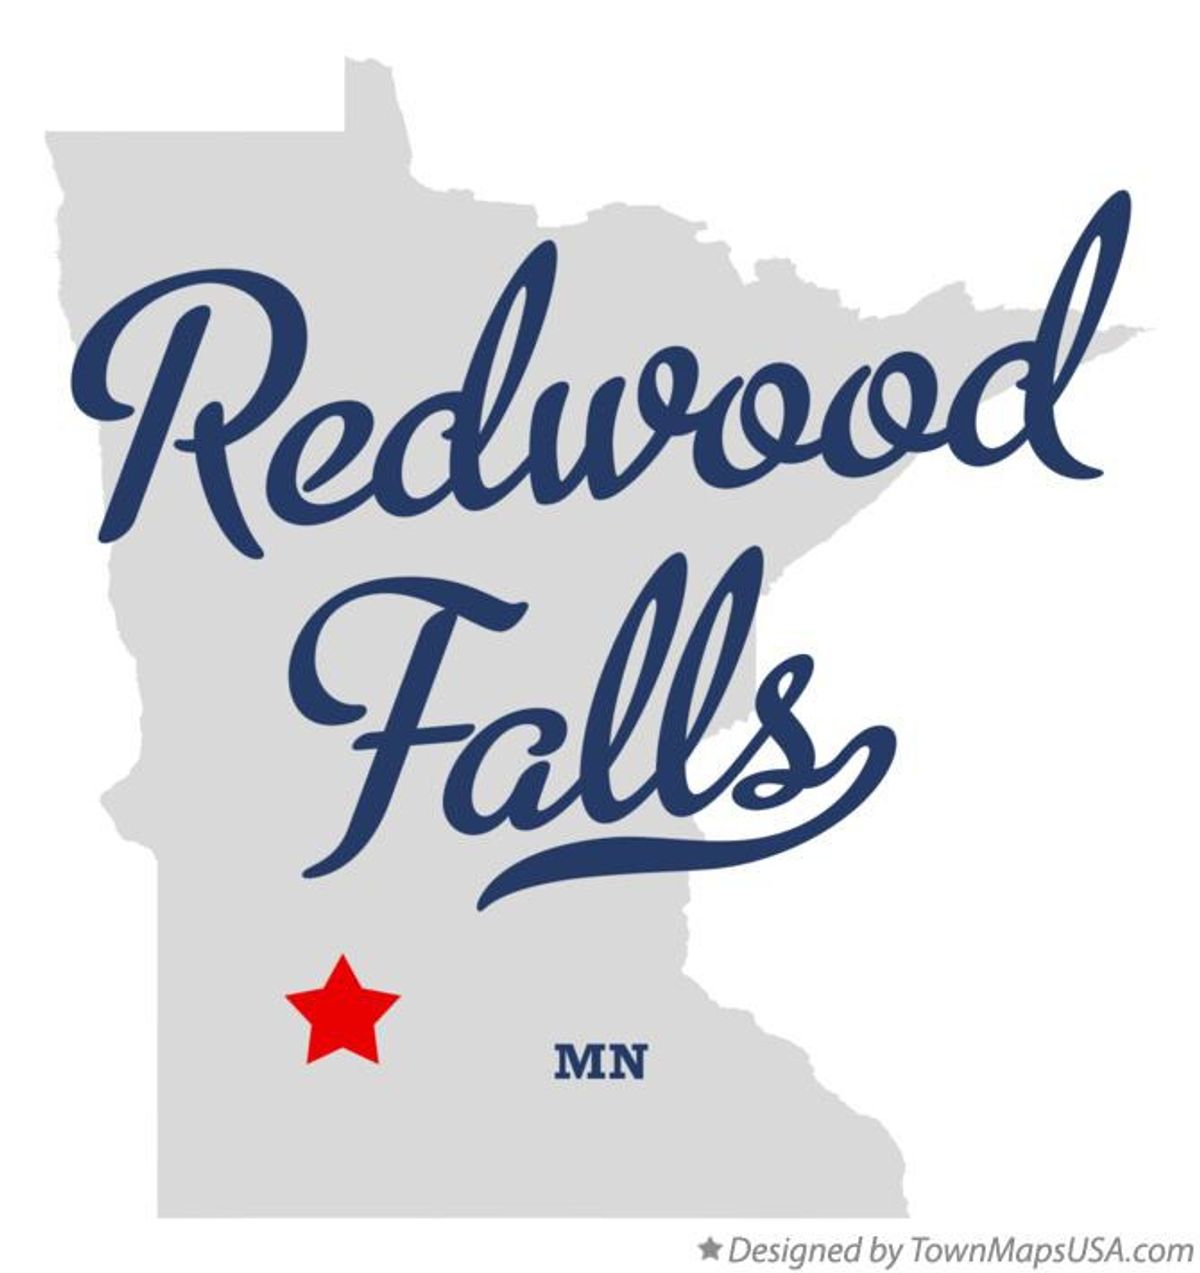 Redwood Falls was Better Than I Thought